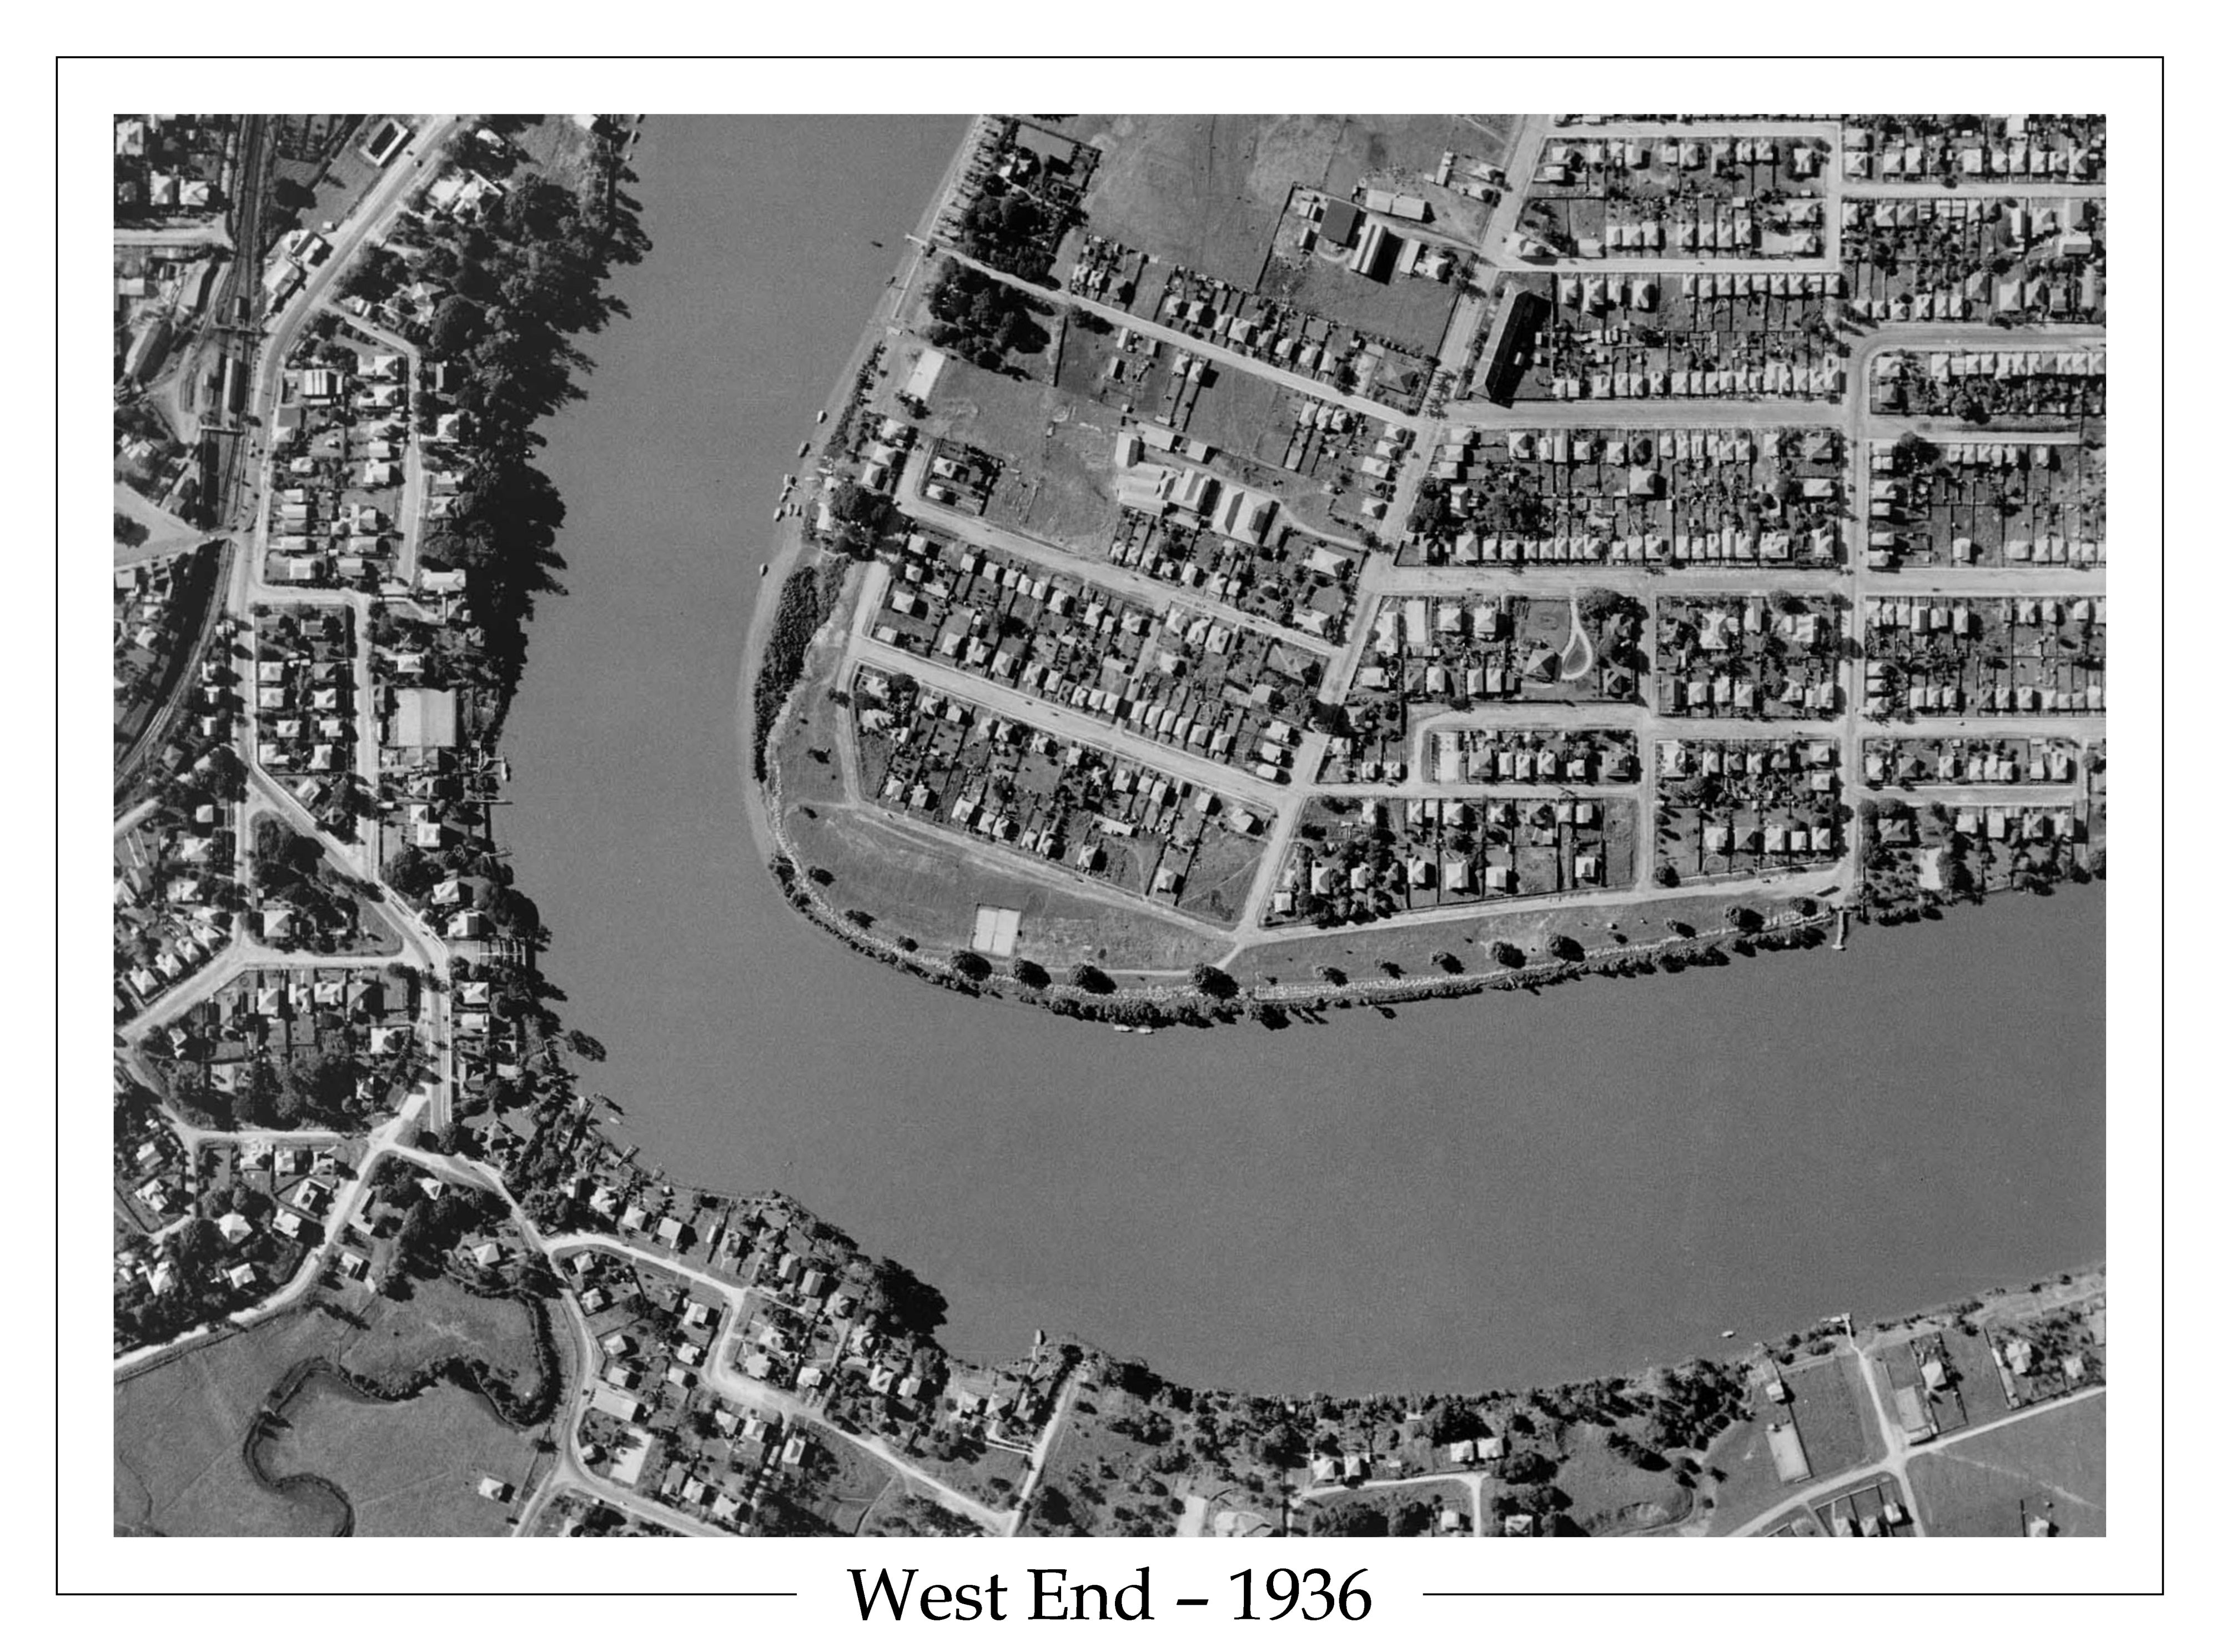 1936 West End - Aerial Photo - Hill End